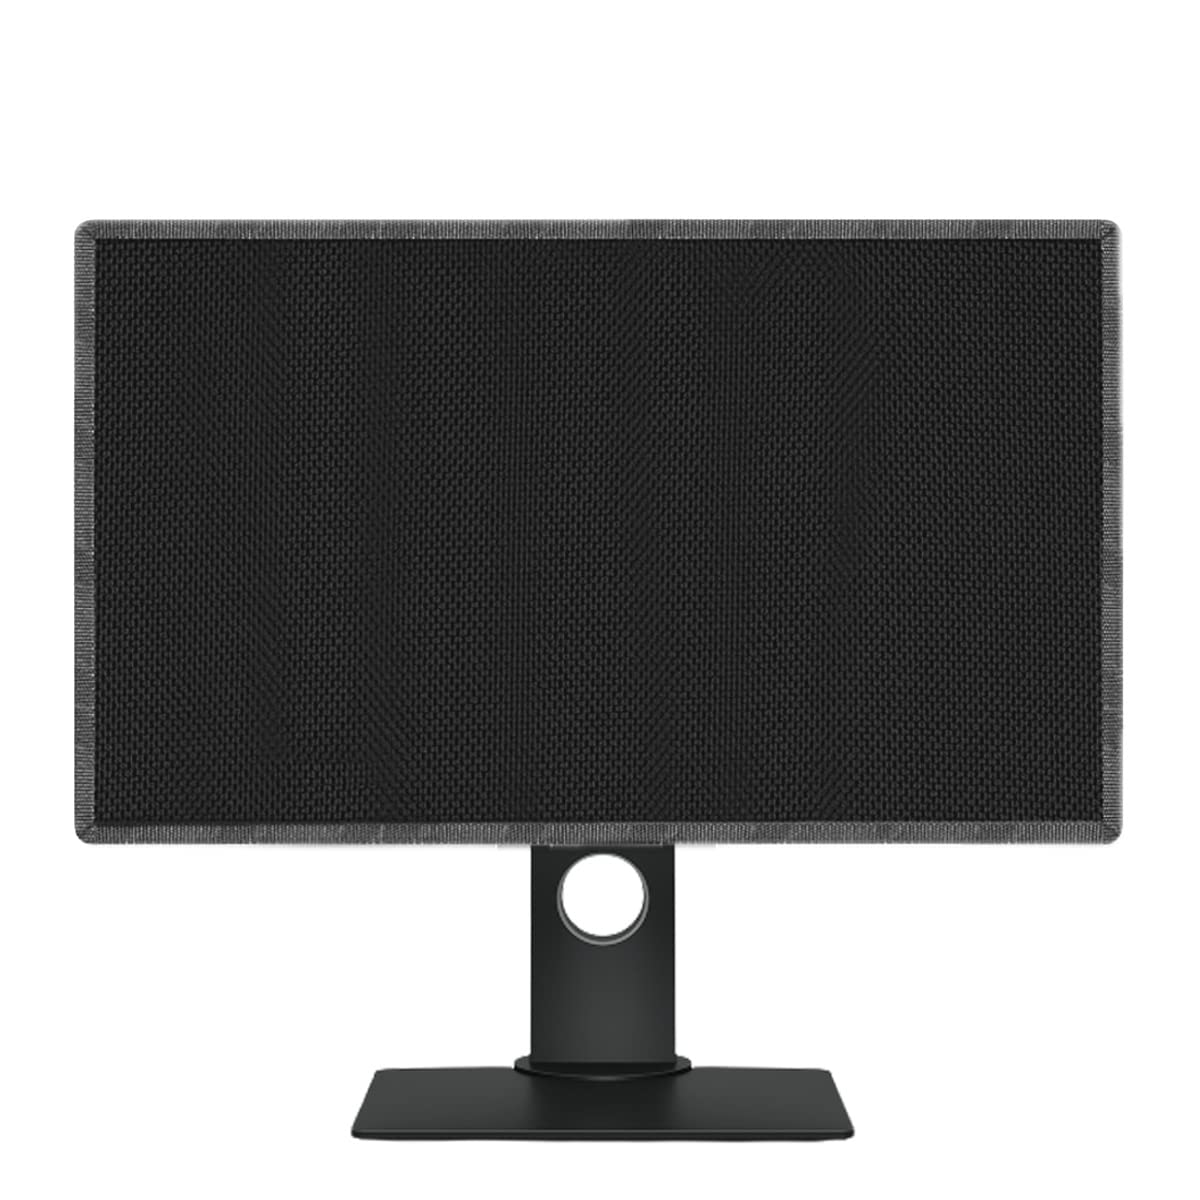 PalaP Super Premium Dust Proof Monitor Cover for LG 24 inches Monitor (Black)